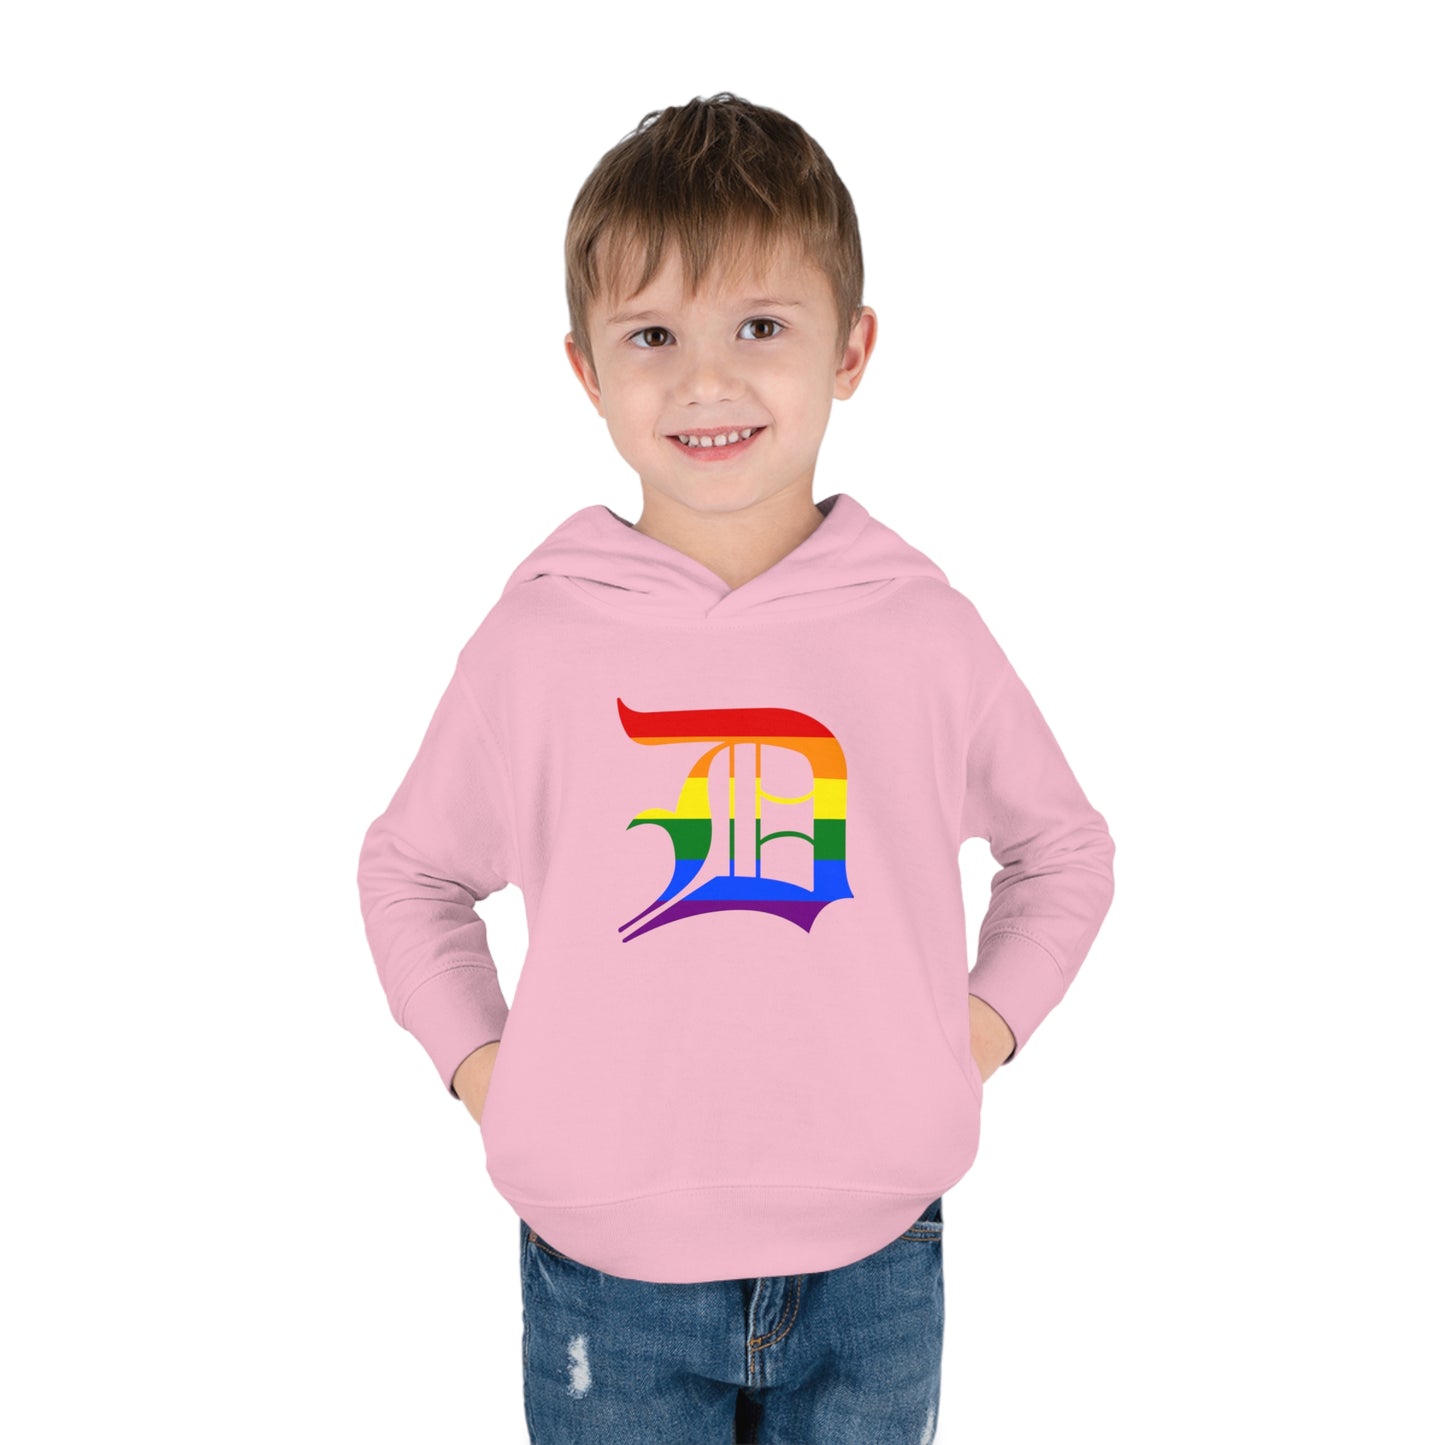 Detroit 'Old English D' Hoodie (Rainbow Pride Edition)| Unisex Toddler